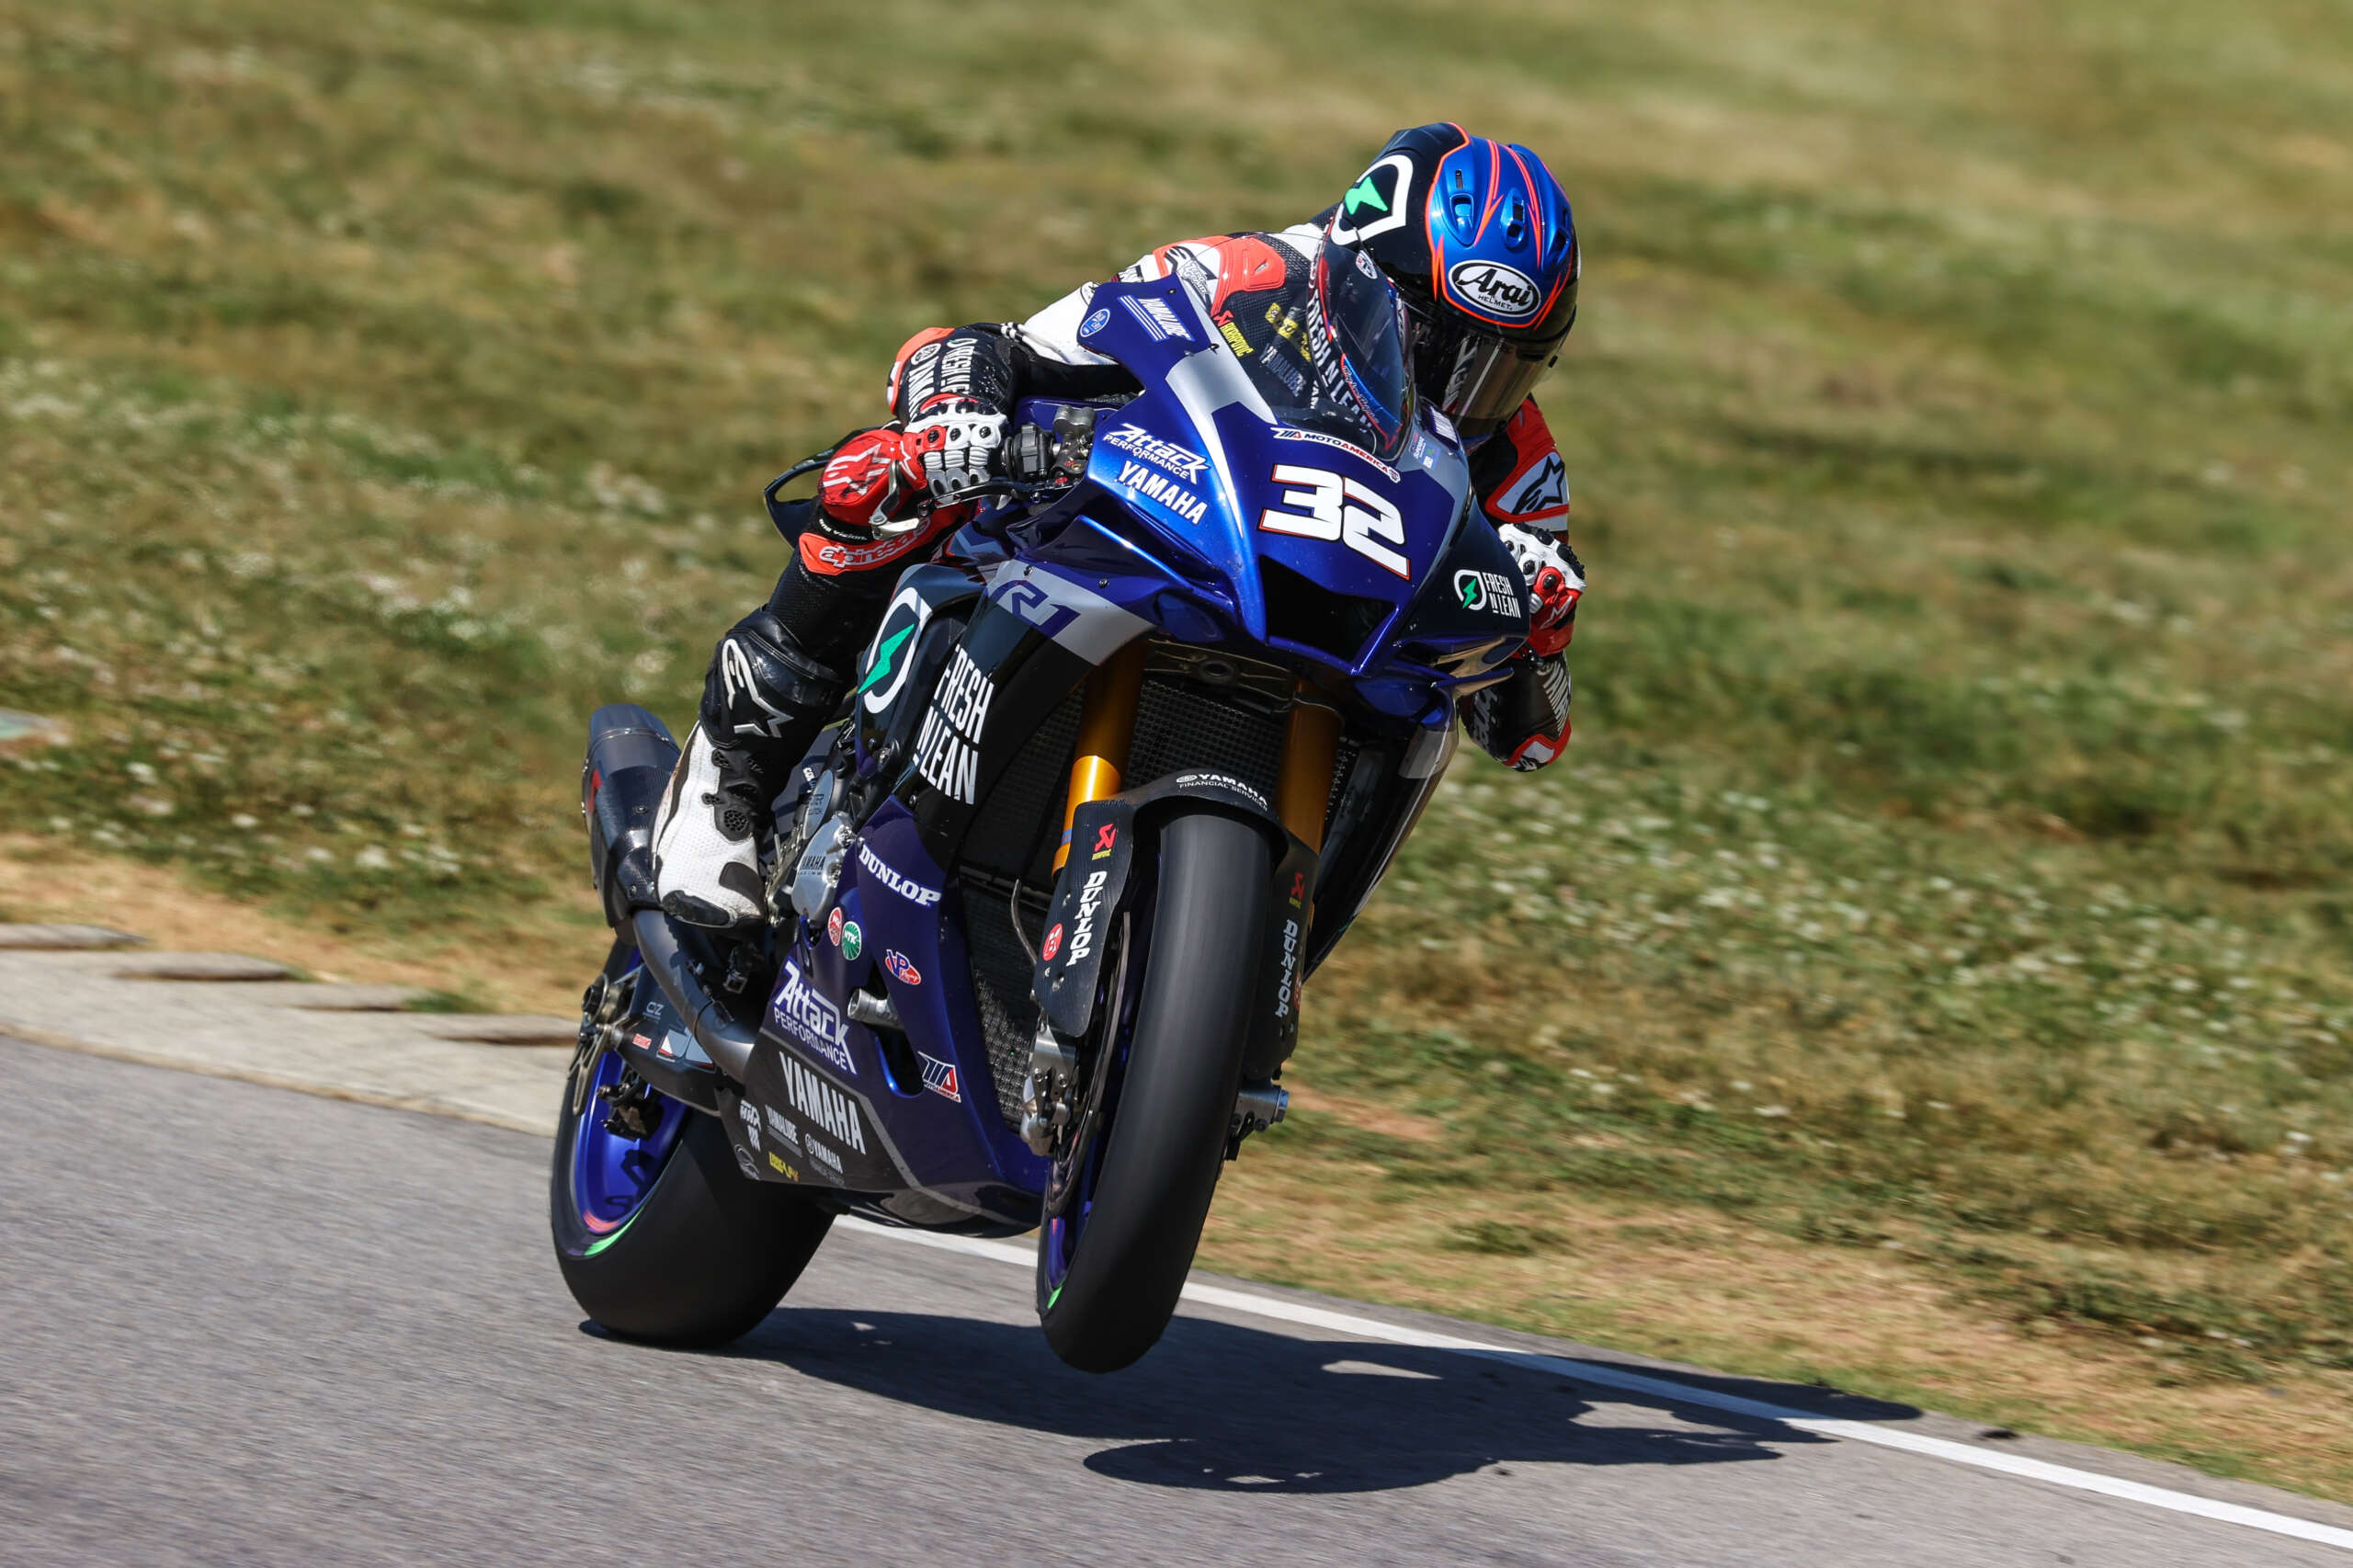 It’s Game On For MotoAmerica’s Round Three At Road America